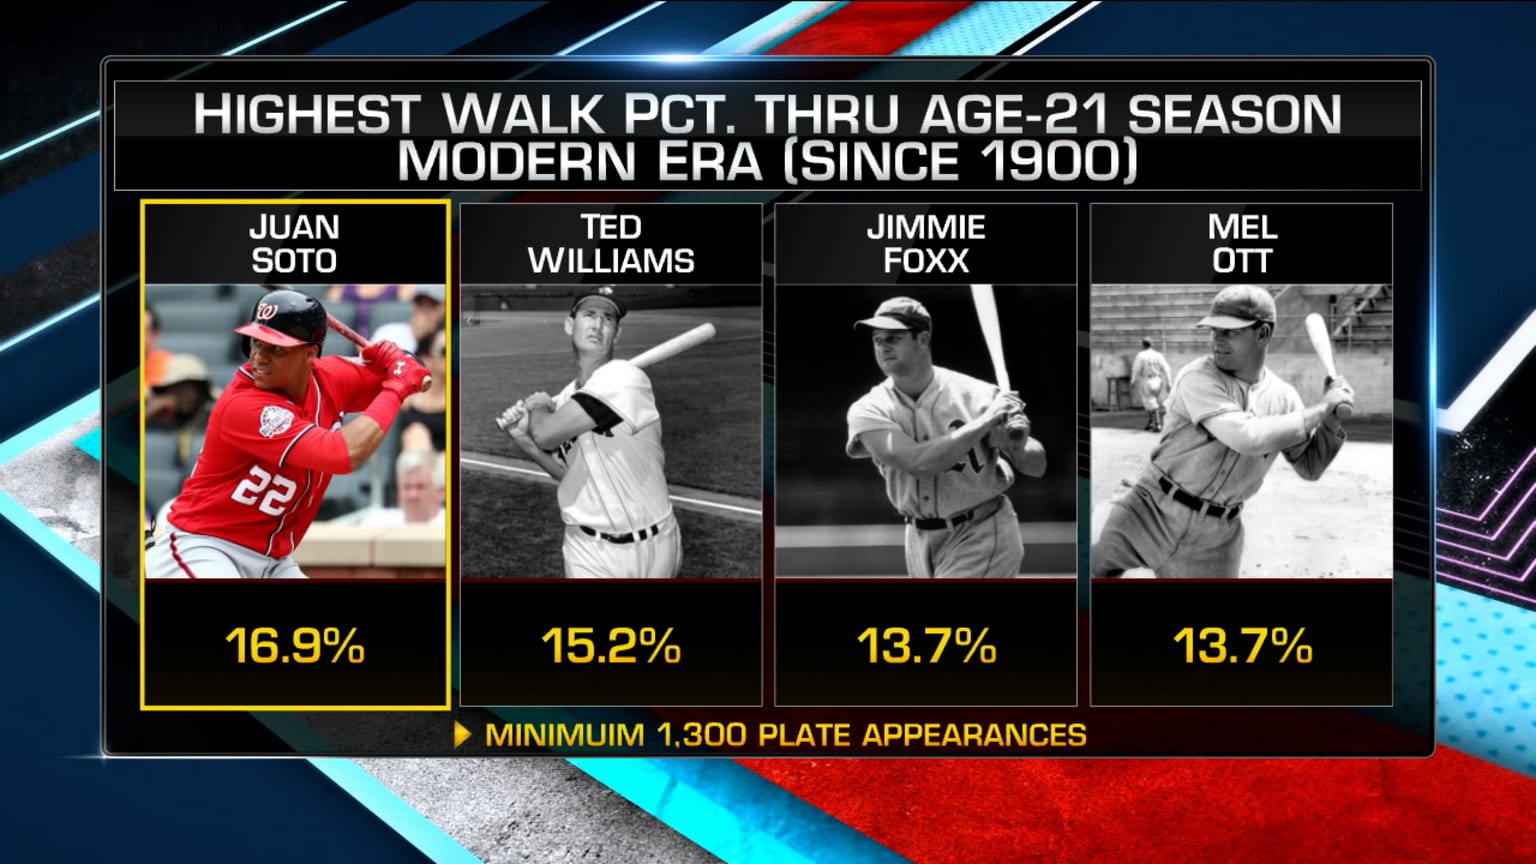 Comparing Soto to Ted Williams, 03/09/2021